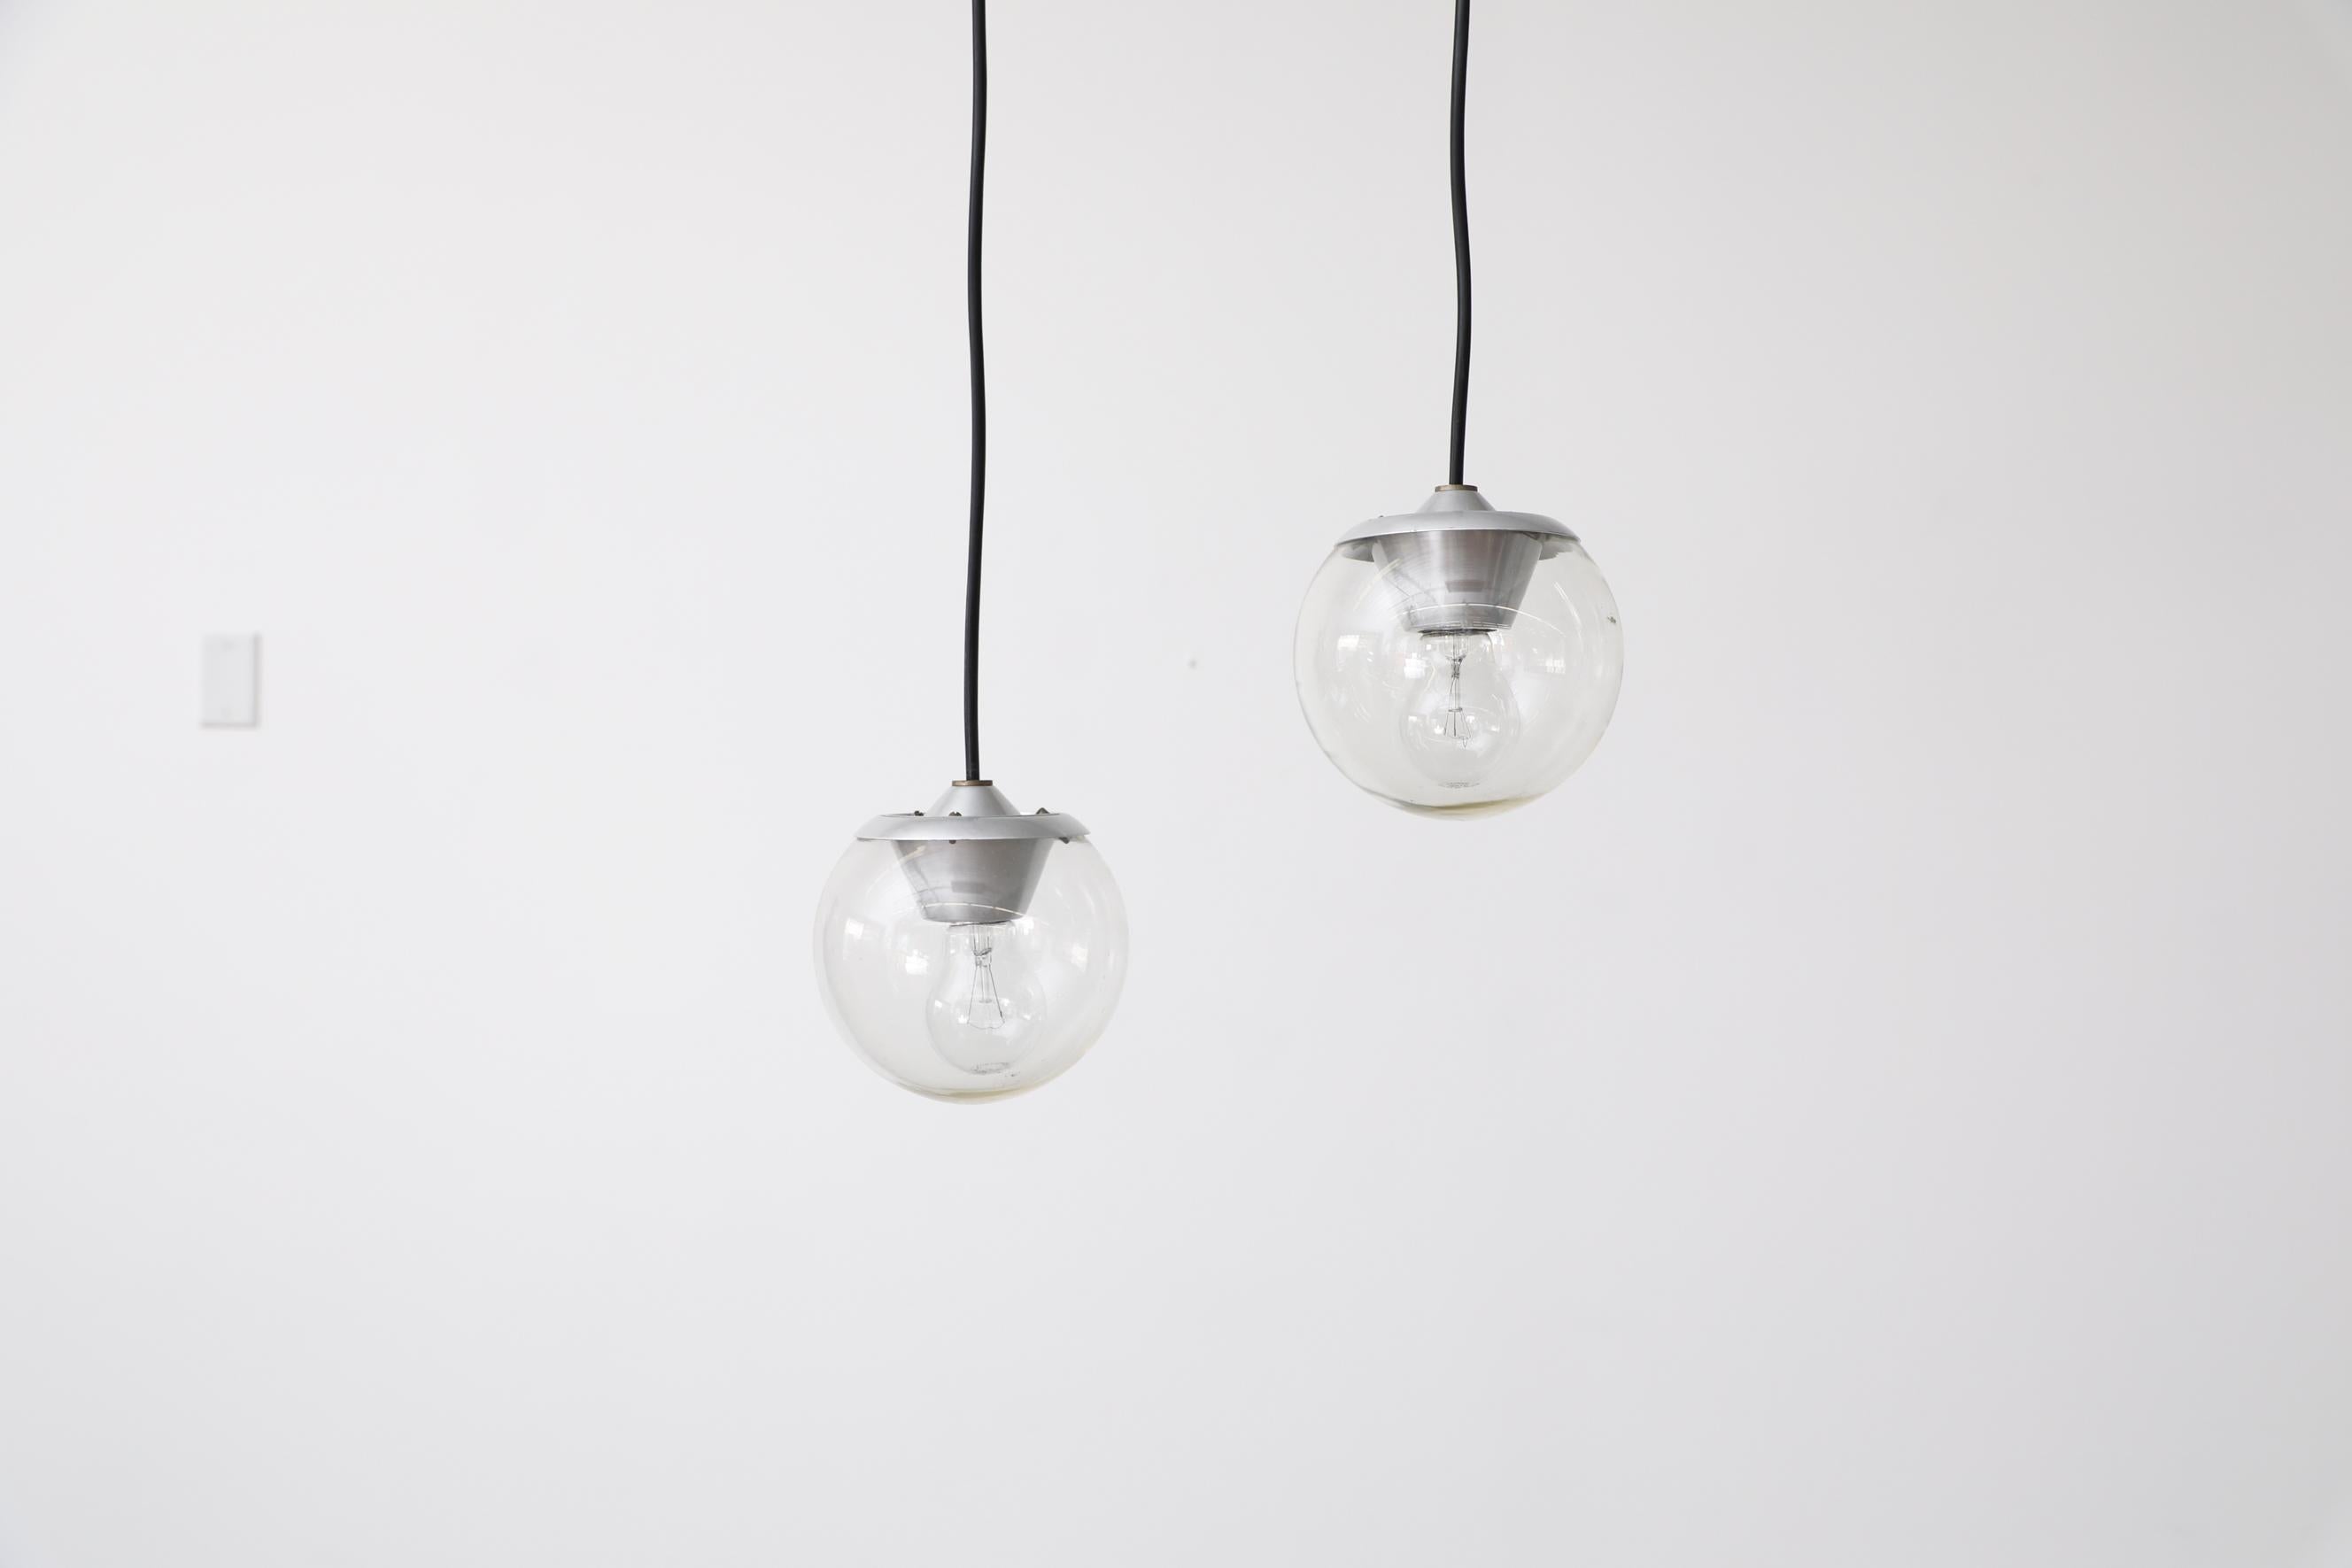 Pair of Gino Sarfatti Glass Pendant Lights Model 2095/1 by Arteluce, Italy, 1958 For Sale 3